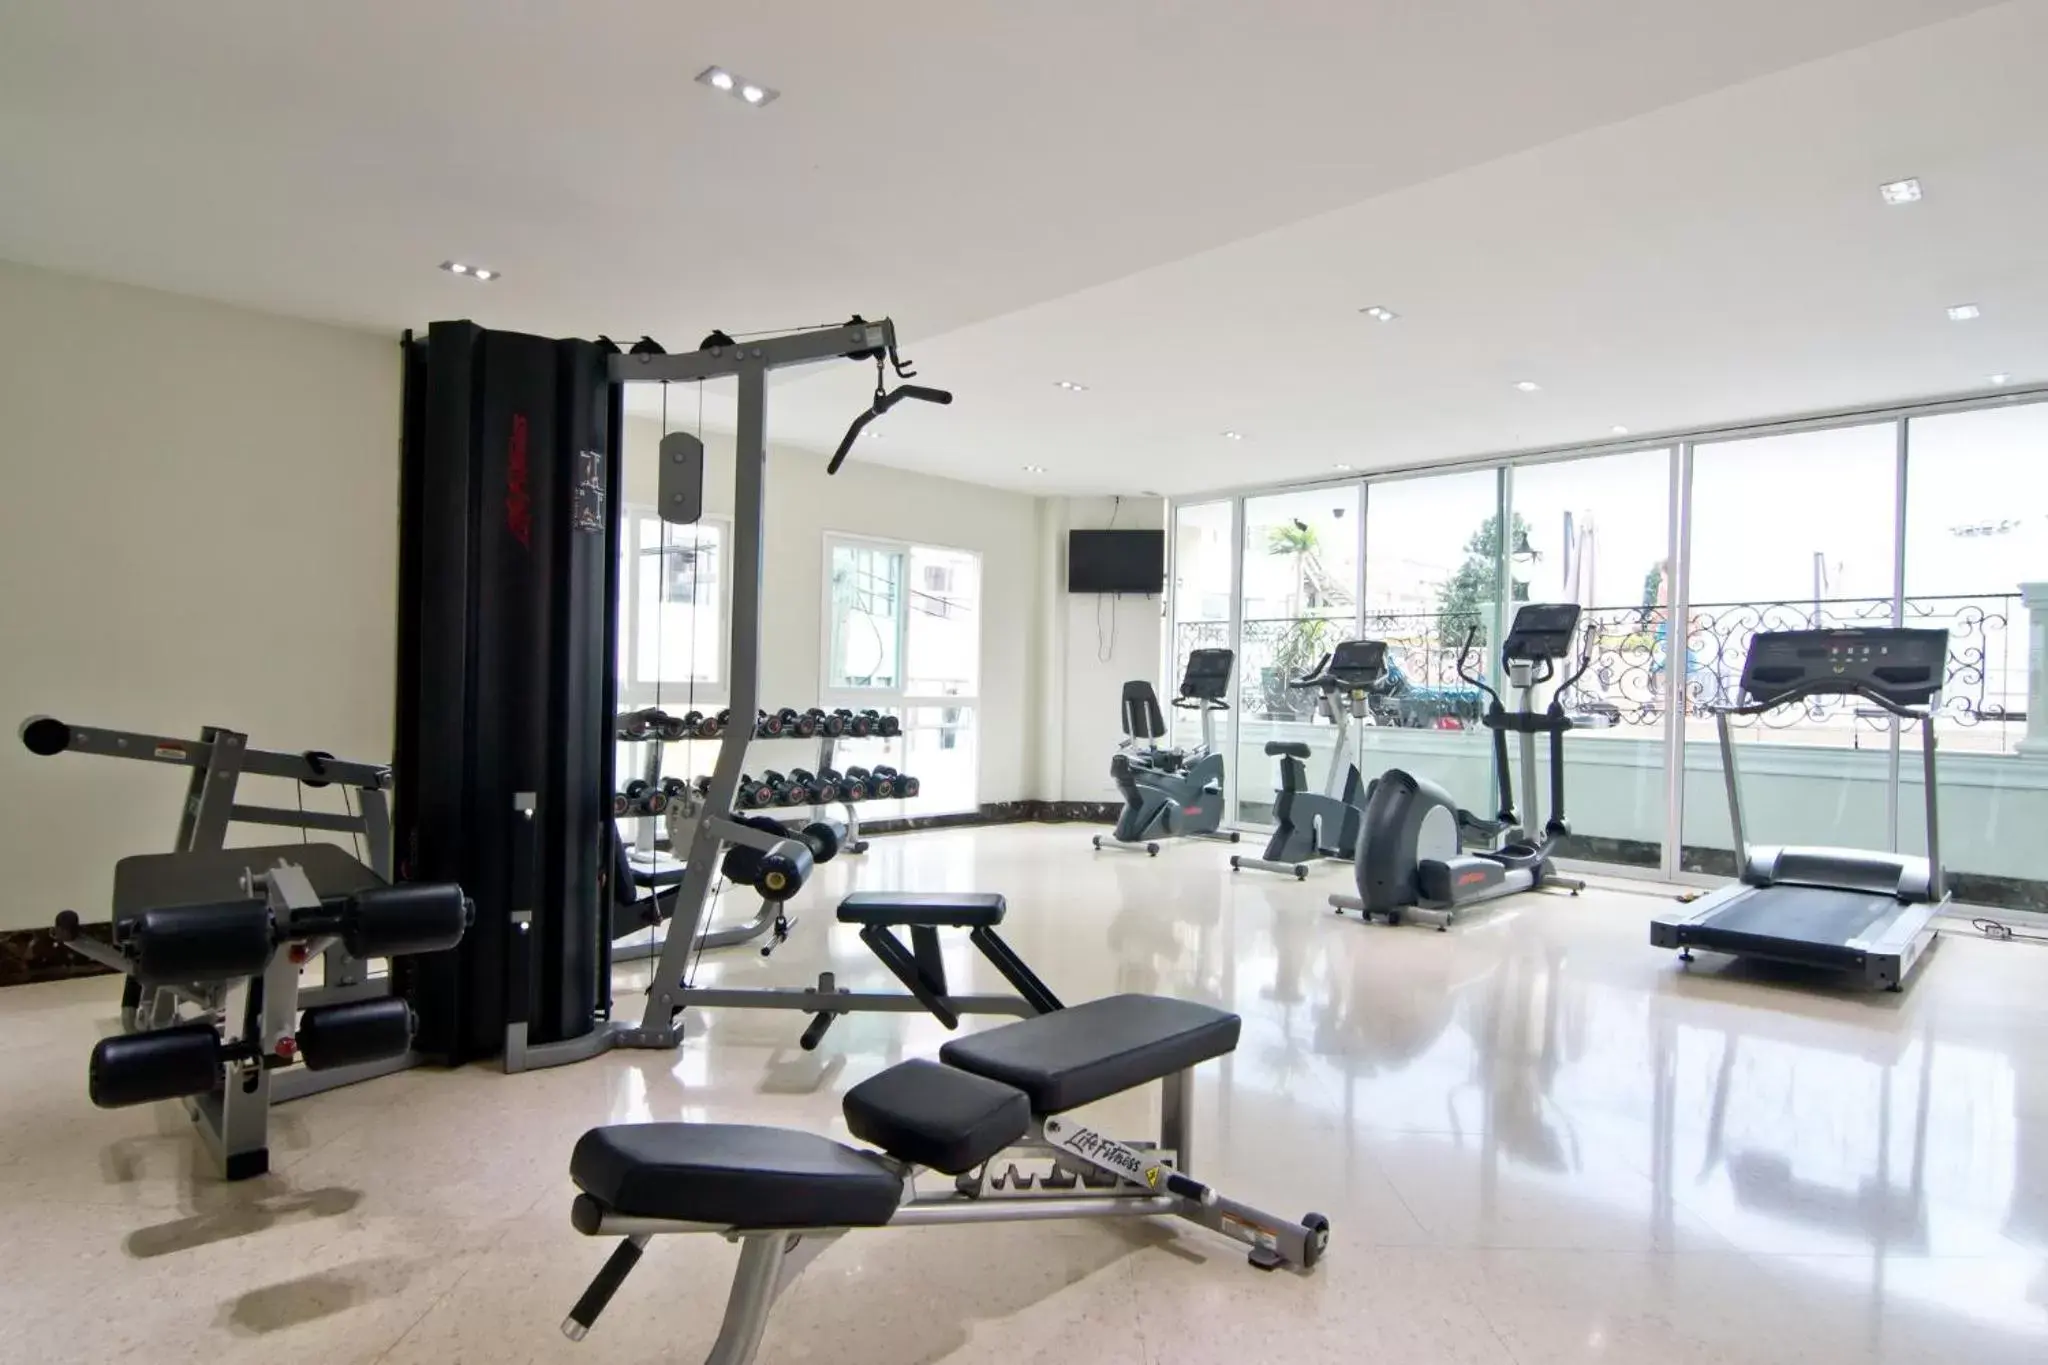 Fitness centre/facilities, Fitness Center/Facilities in LK The Empress